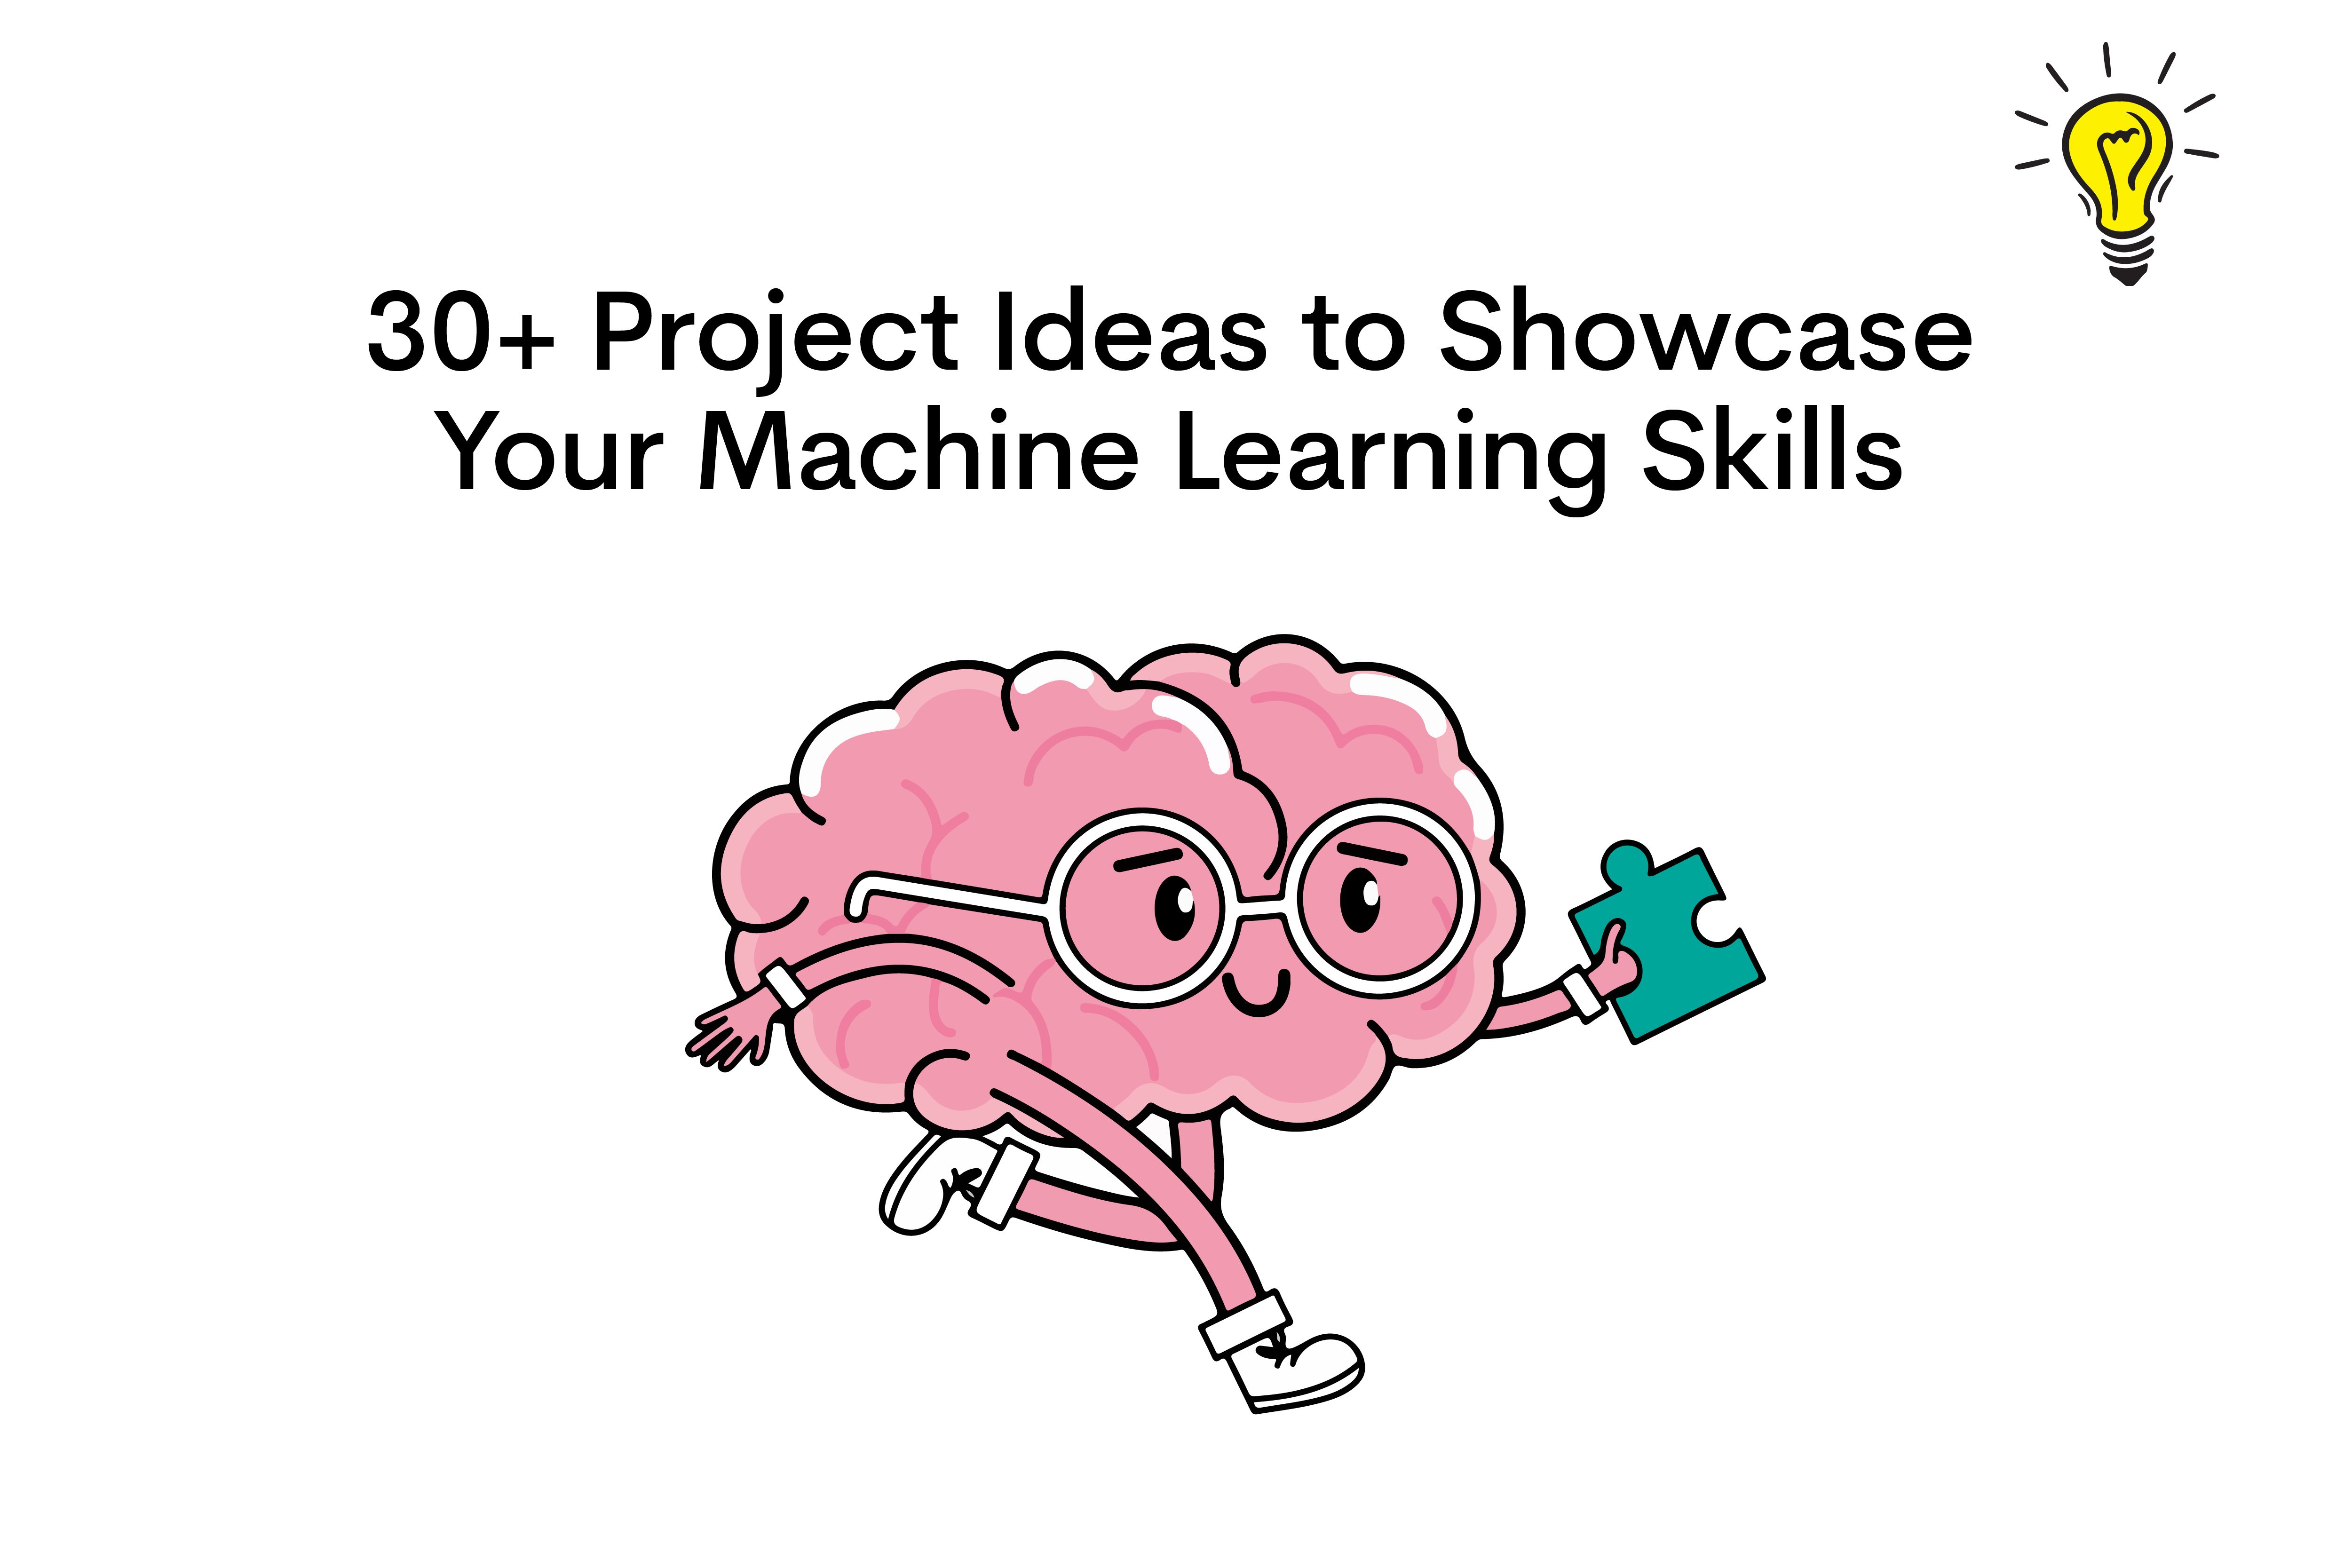 30+ Project Ideas to Showcase Your Machine Learning Skills - StrataScratch